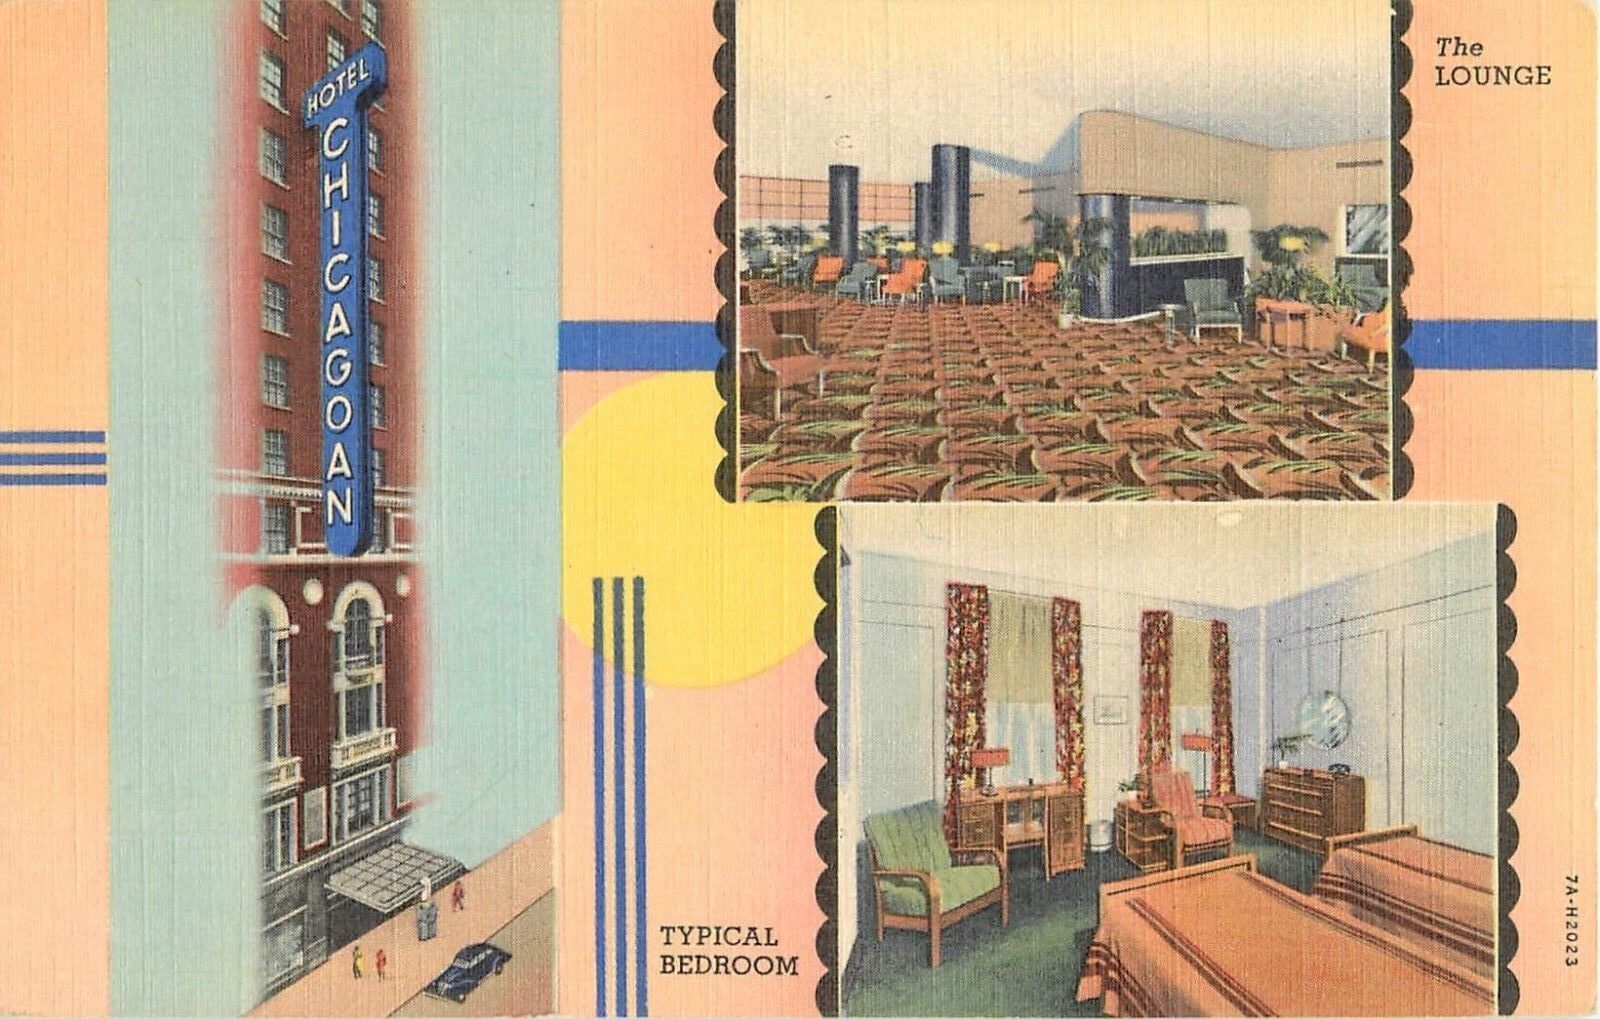 c1940 Hotel Chicagoan, Typical Bedroom/Lounge, Chicago, Illinois Postcard